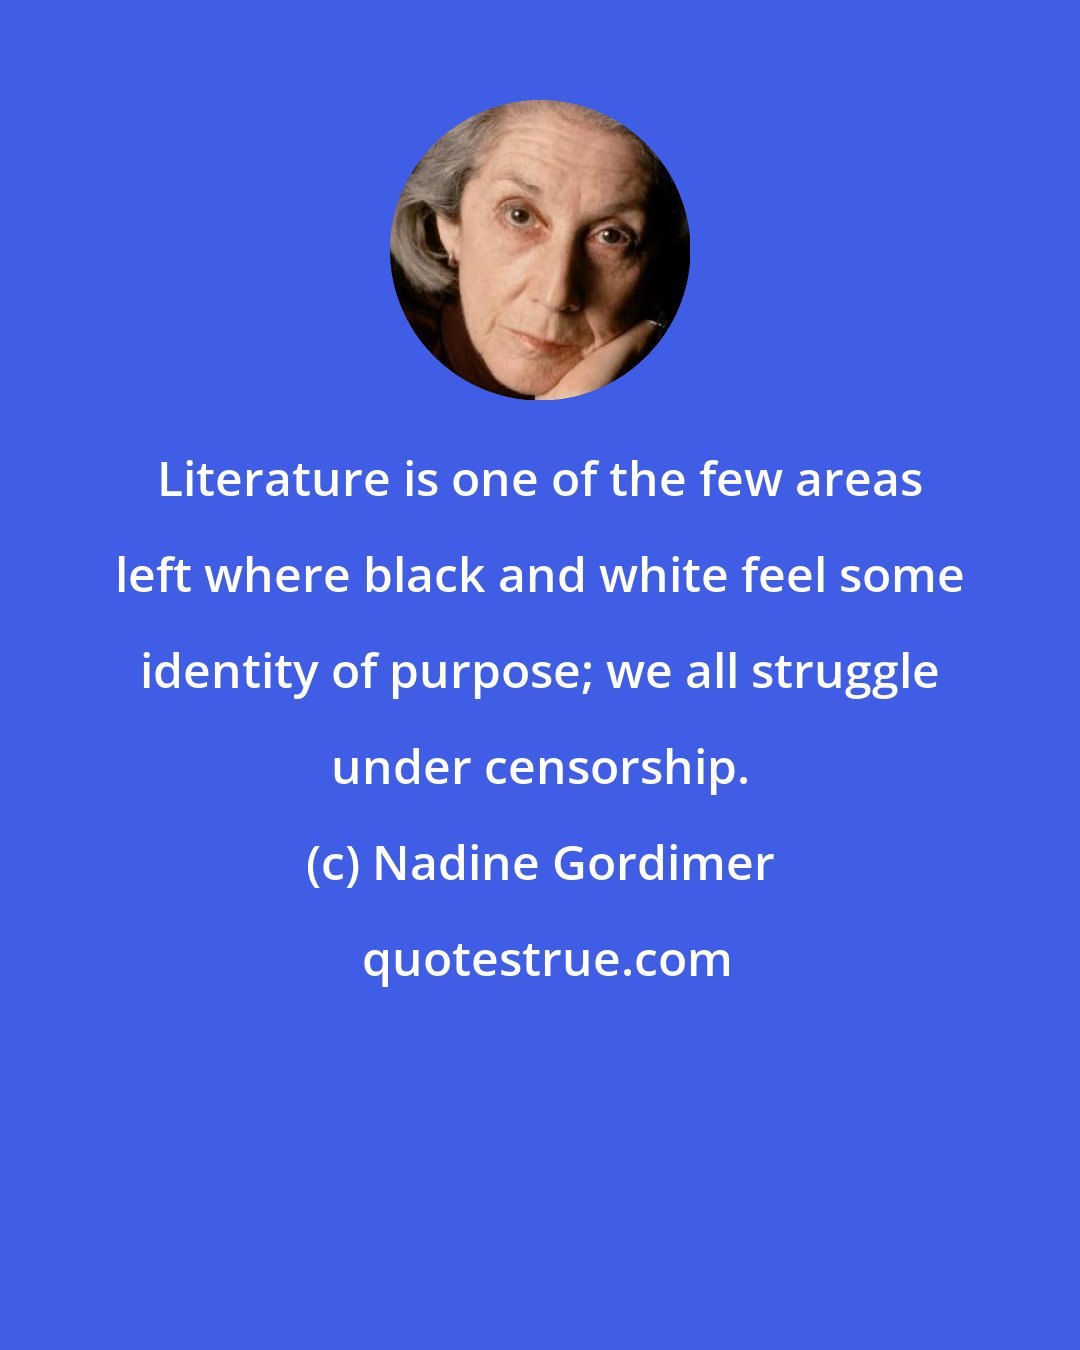 Nadine Gordimer: Literature is one of the few areas left where black and white feel some identity of purpose; we all struggle under censorship.